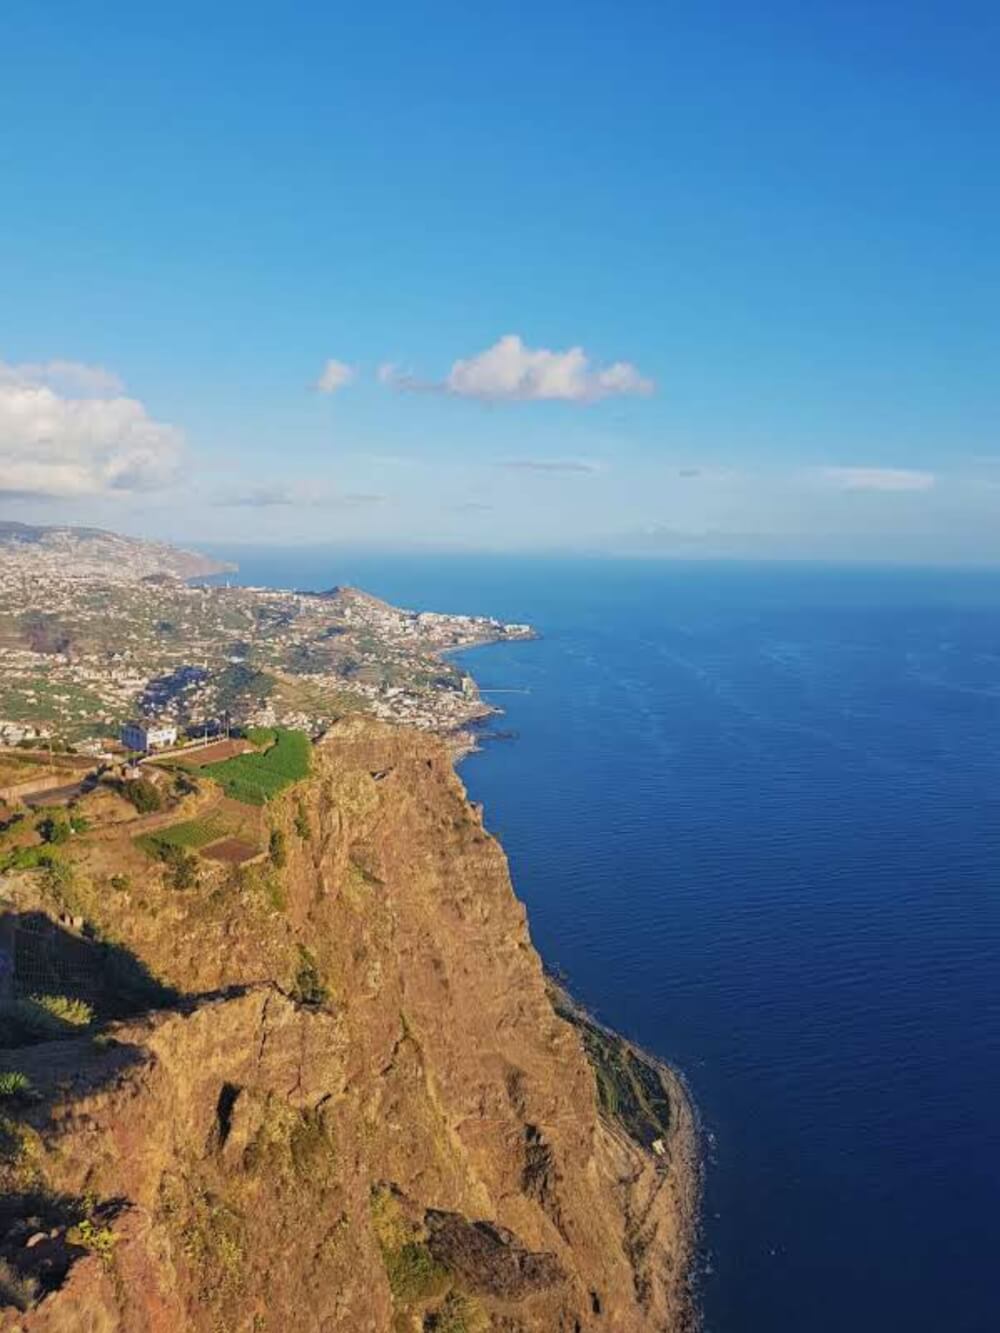 A view of Madeira from above - the Atlantic ocean, mountains, and scattered villages 